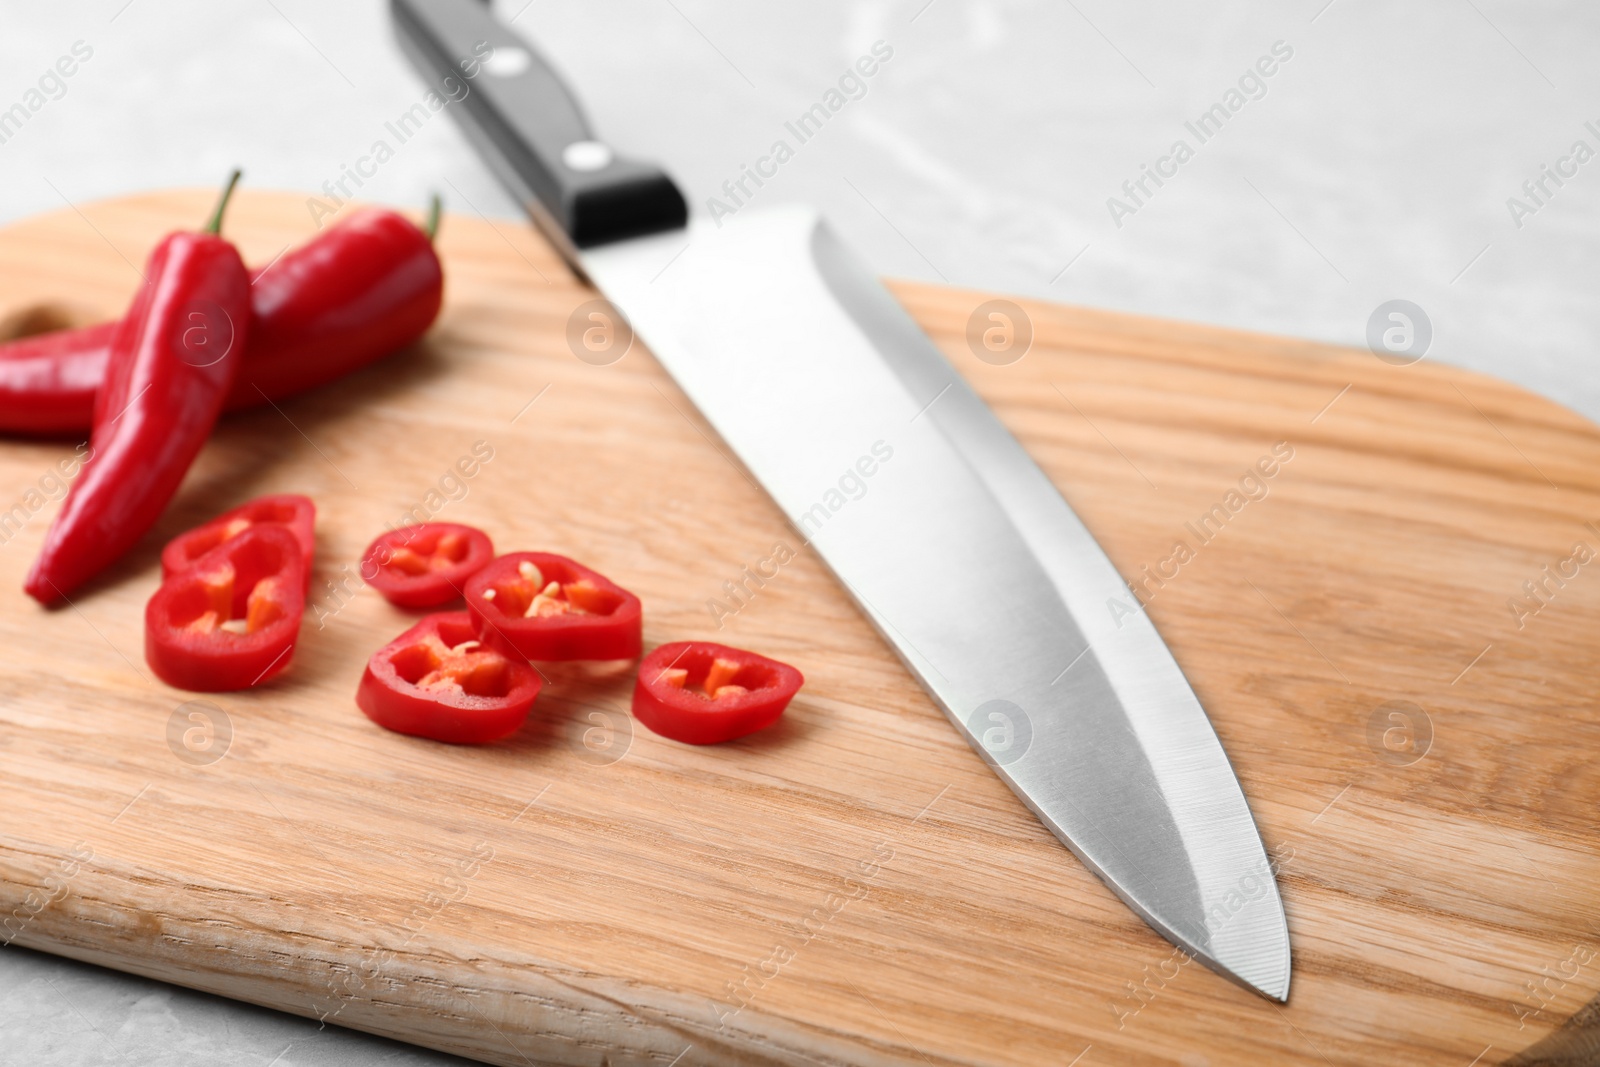 Photo of Wooden board with sharp knife and cut chili peppers on table, closeup